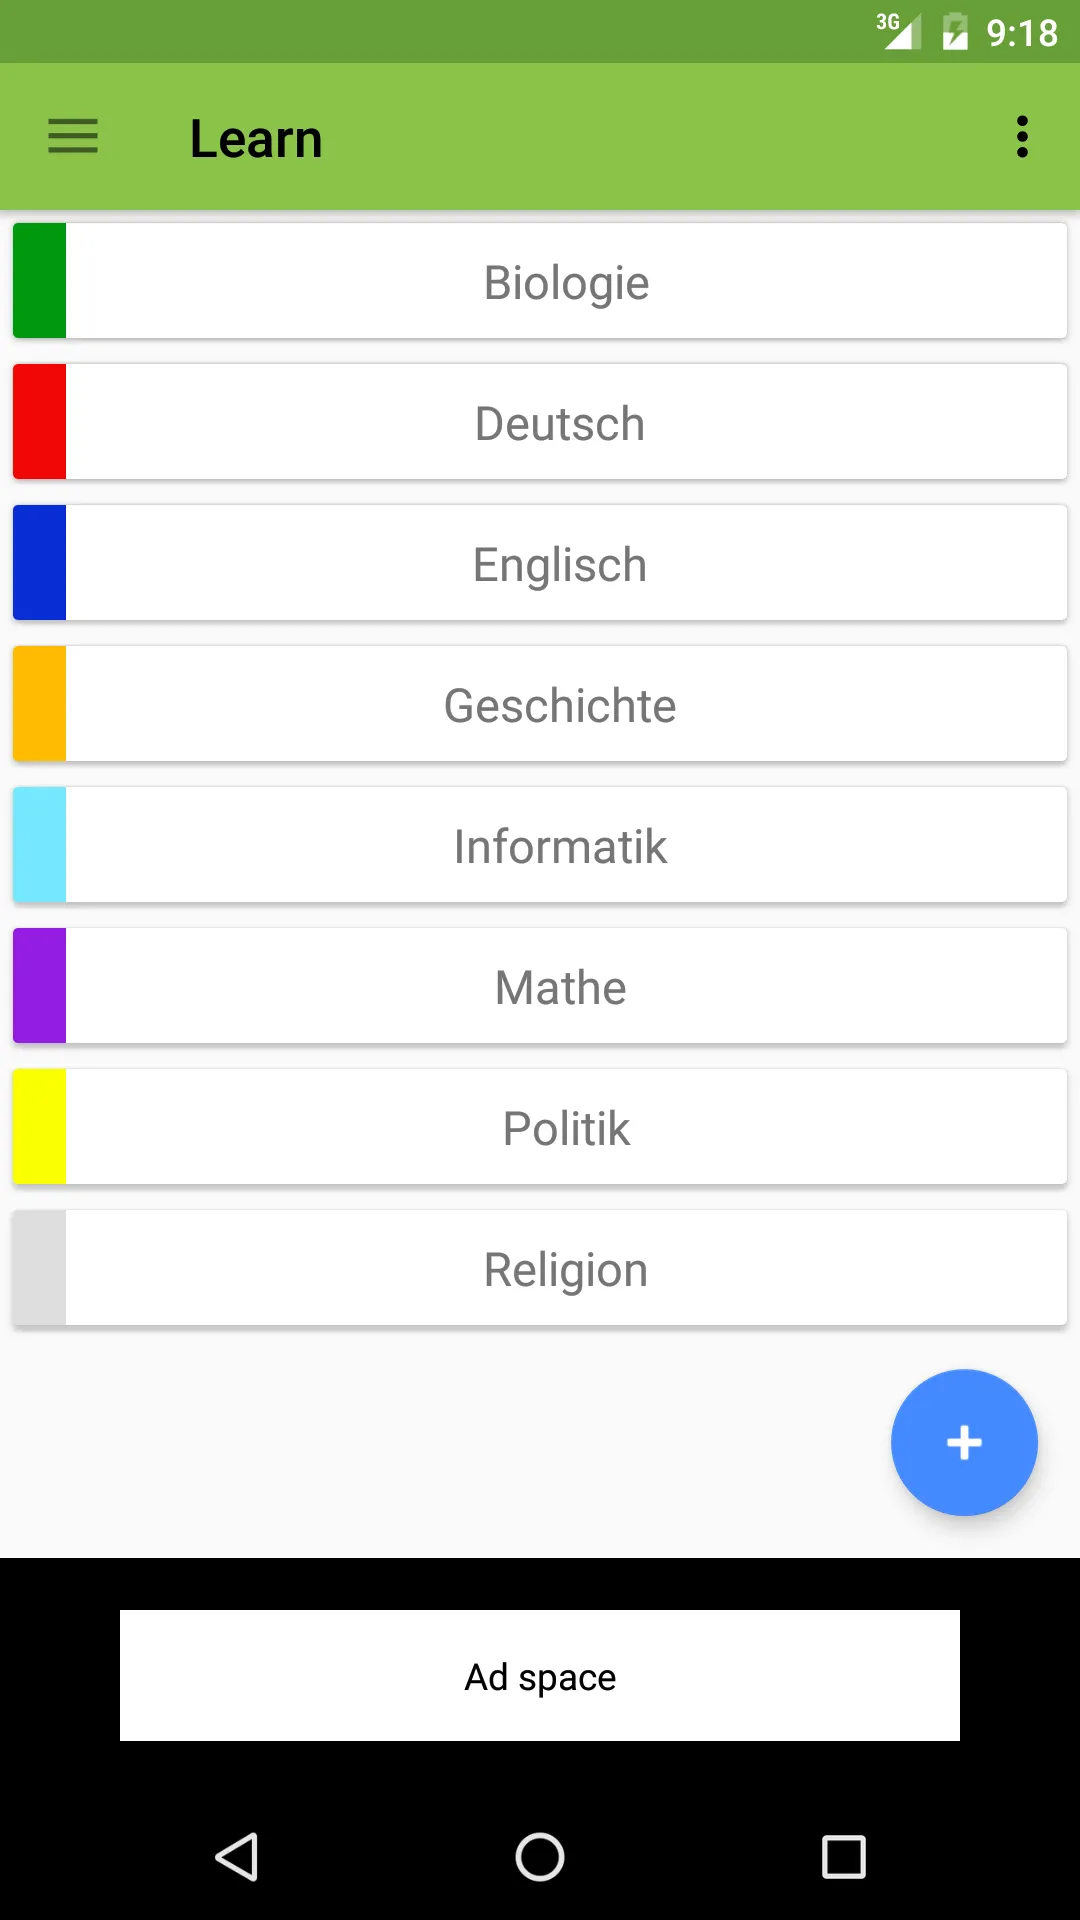 Recyclerview with Items (subjects) color and name (subject name)